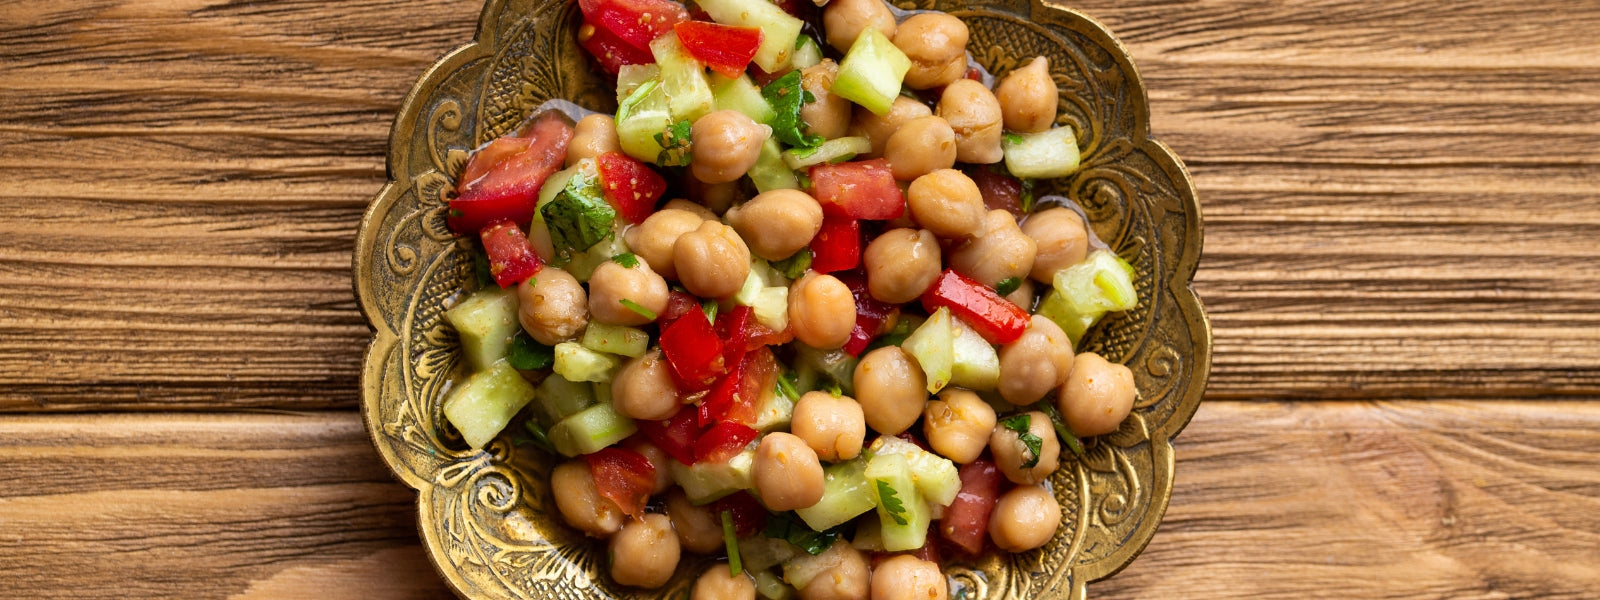 Refreshing Chickpea and Vegetable Salad